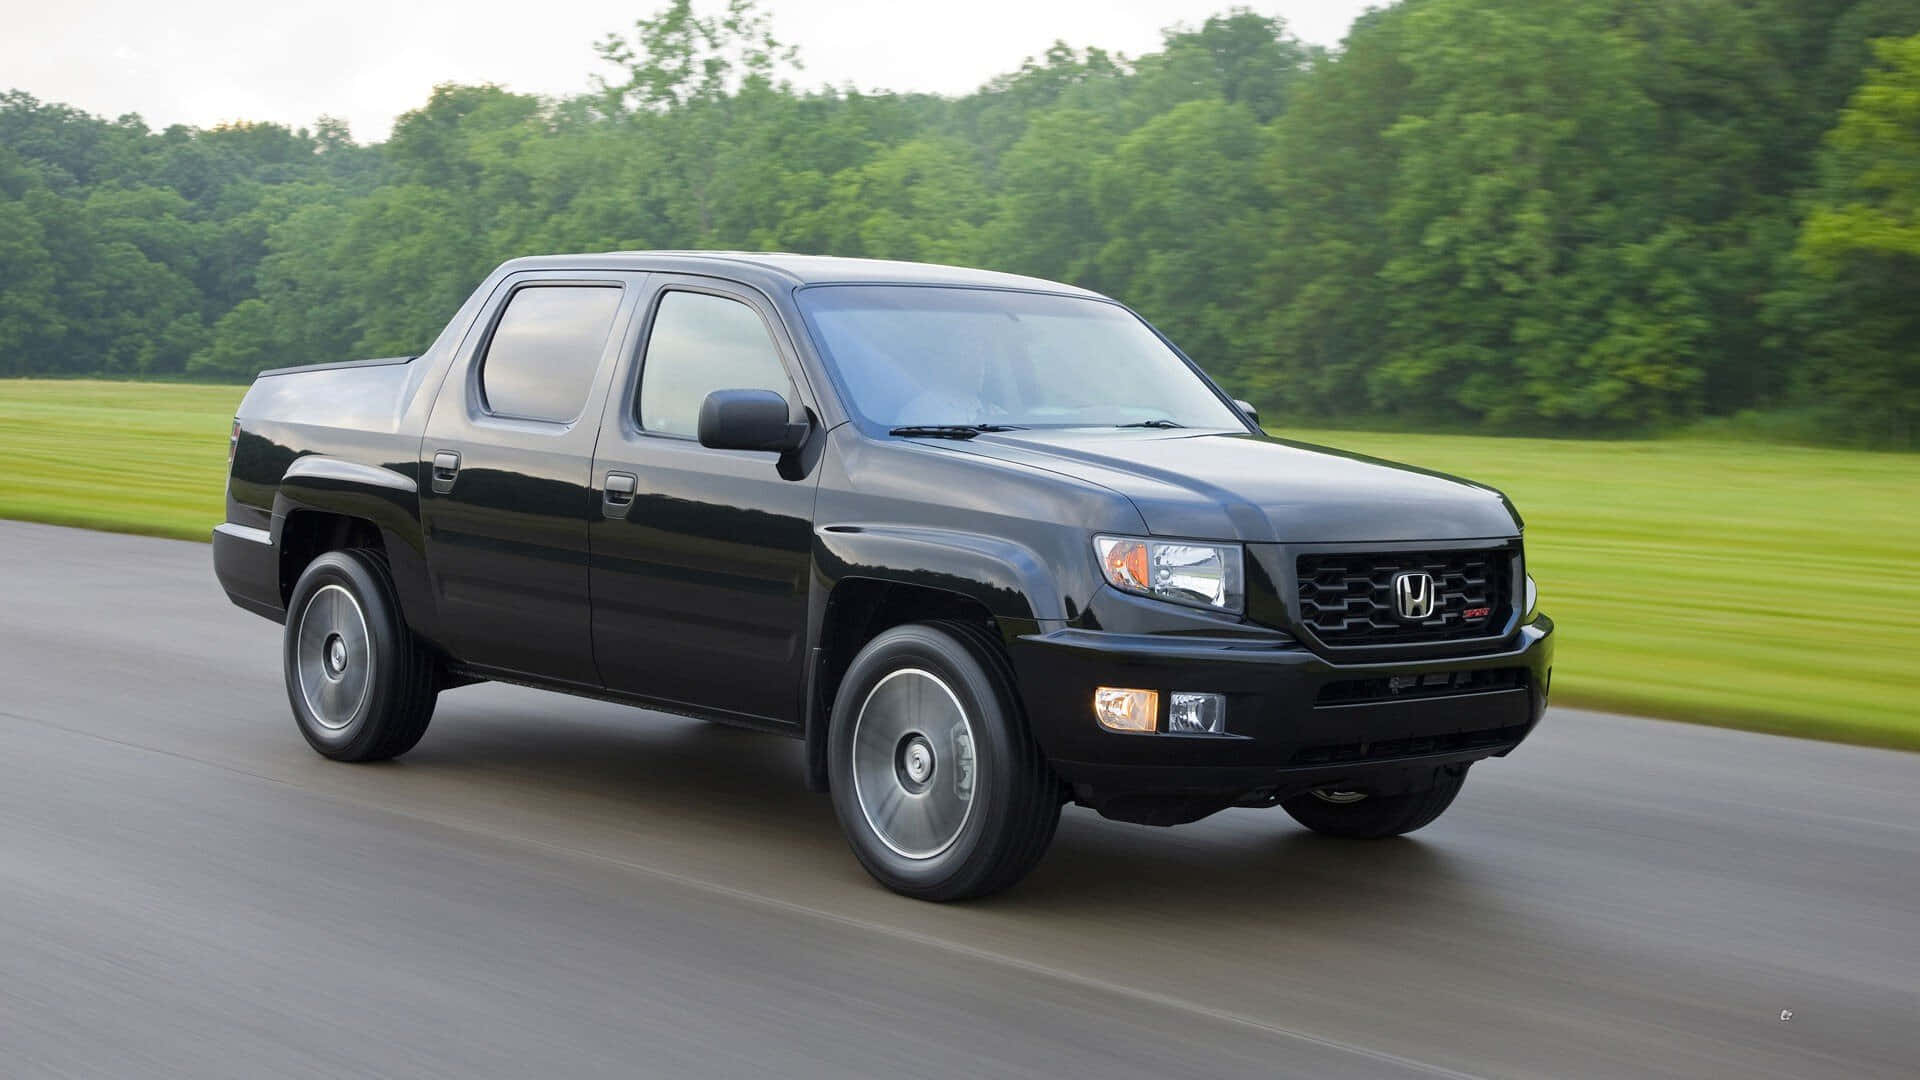 Sleek and Refined - The Honda Ridgeline on a Picturesque Drive Wallpaper